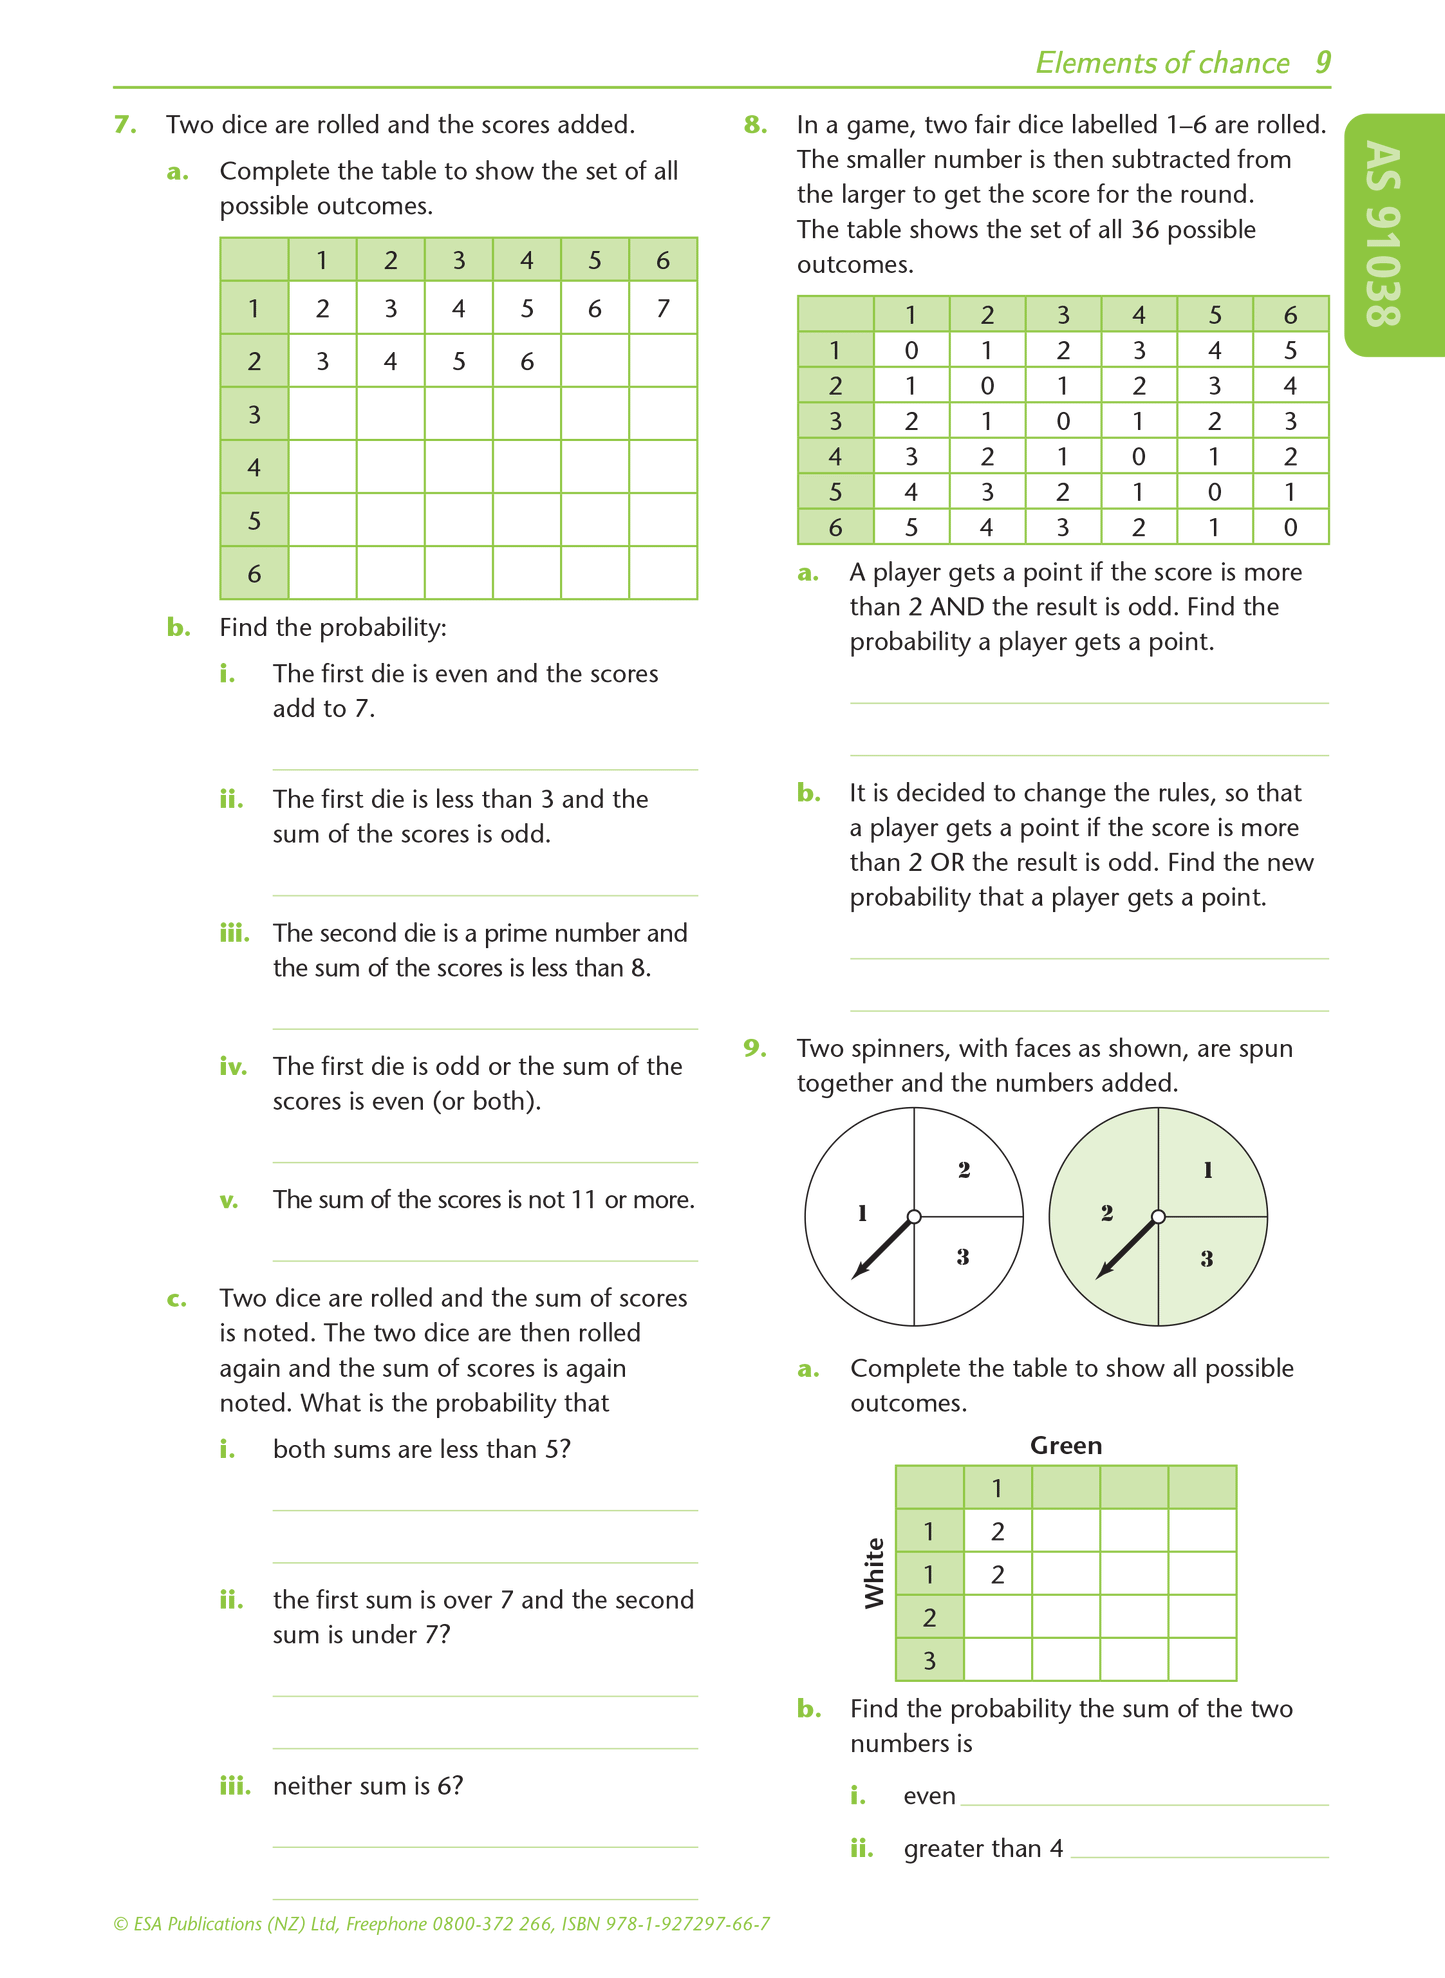 Level 1 Elements of Chance 1.13 Learning Workbook